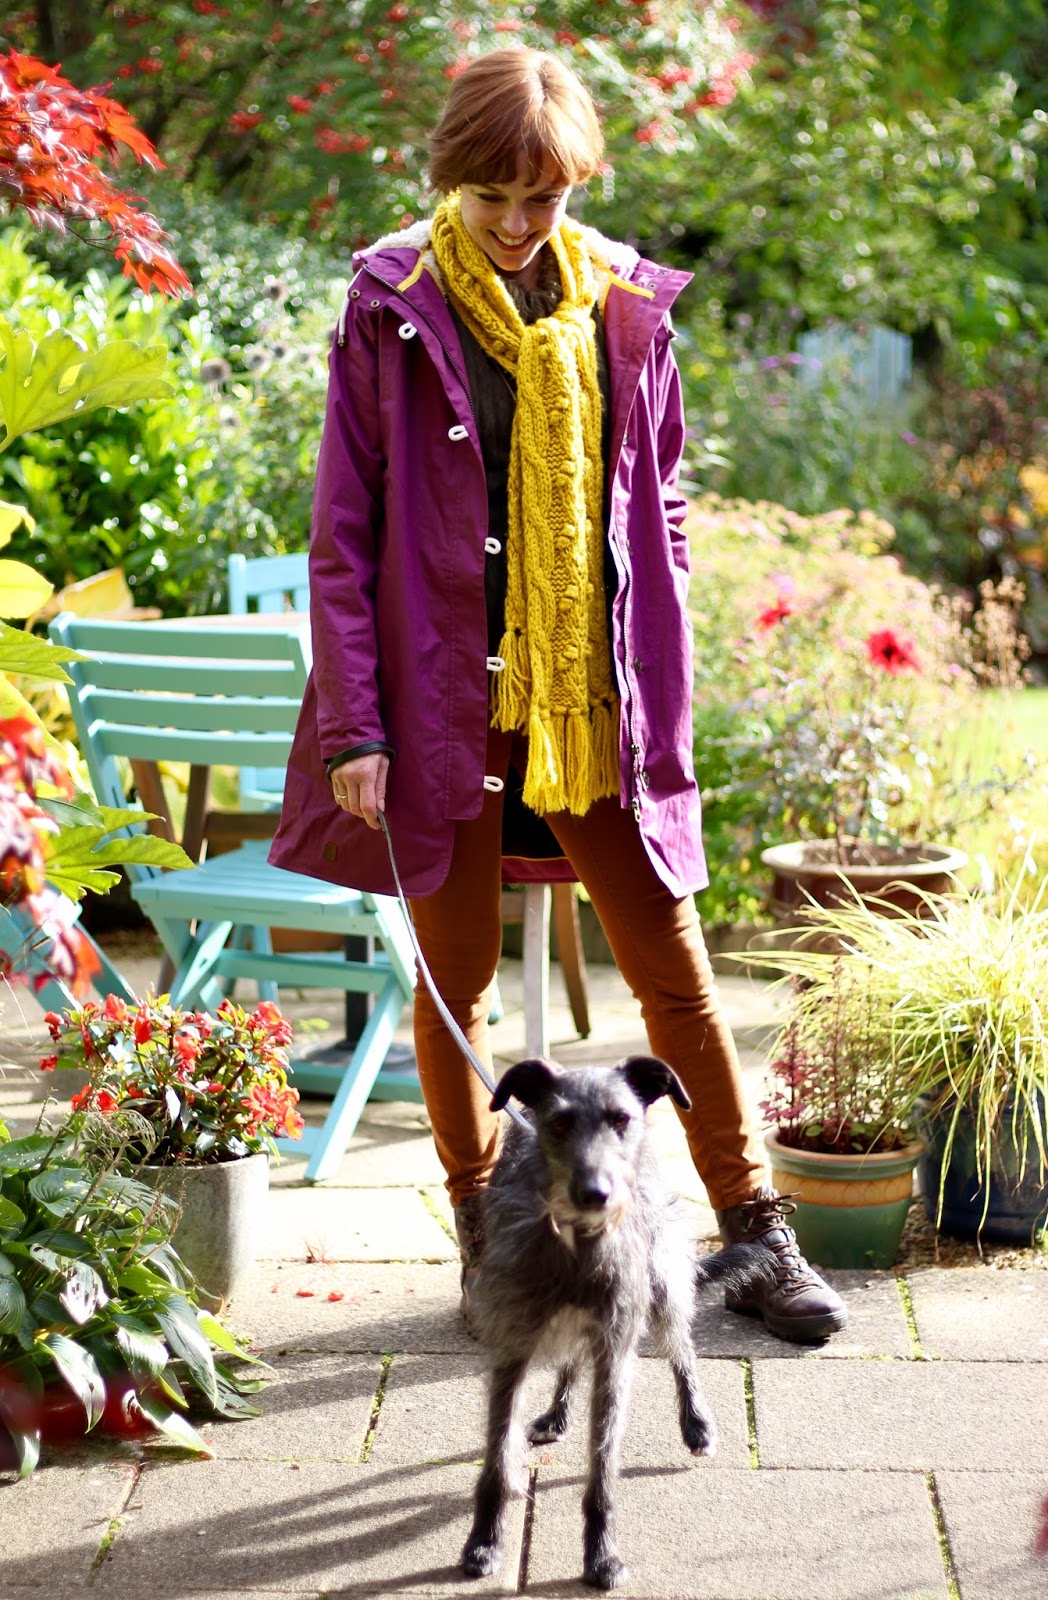 Fake Fabulous | Plum waterproof lighthouse coat, tobacco jeans, yellow scarf and walking boots.